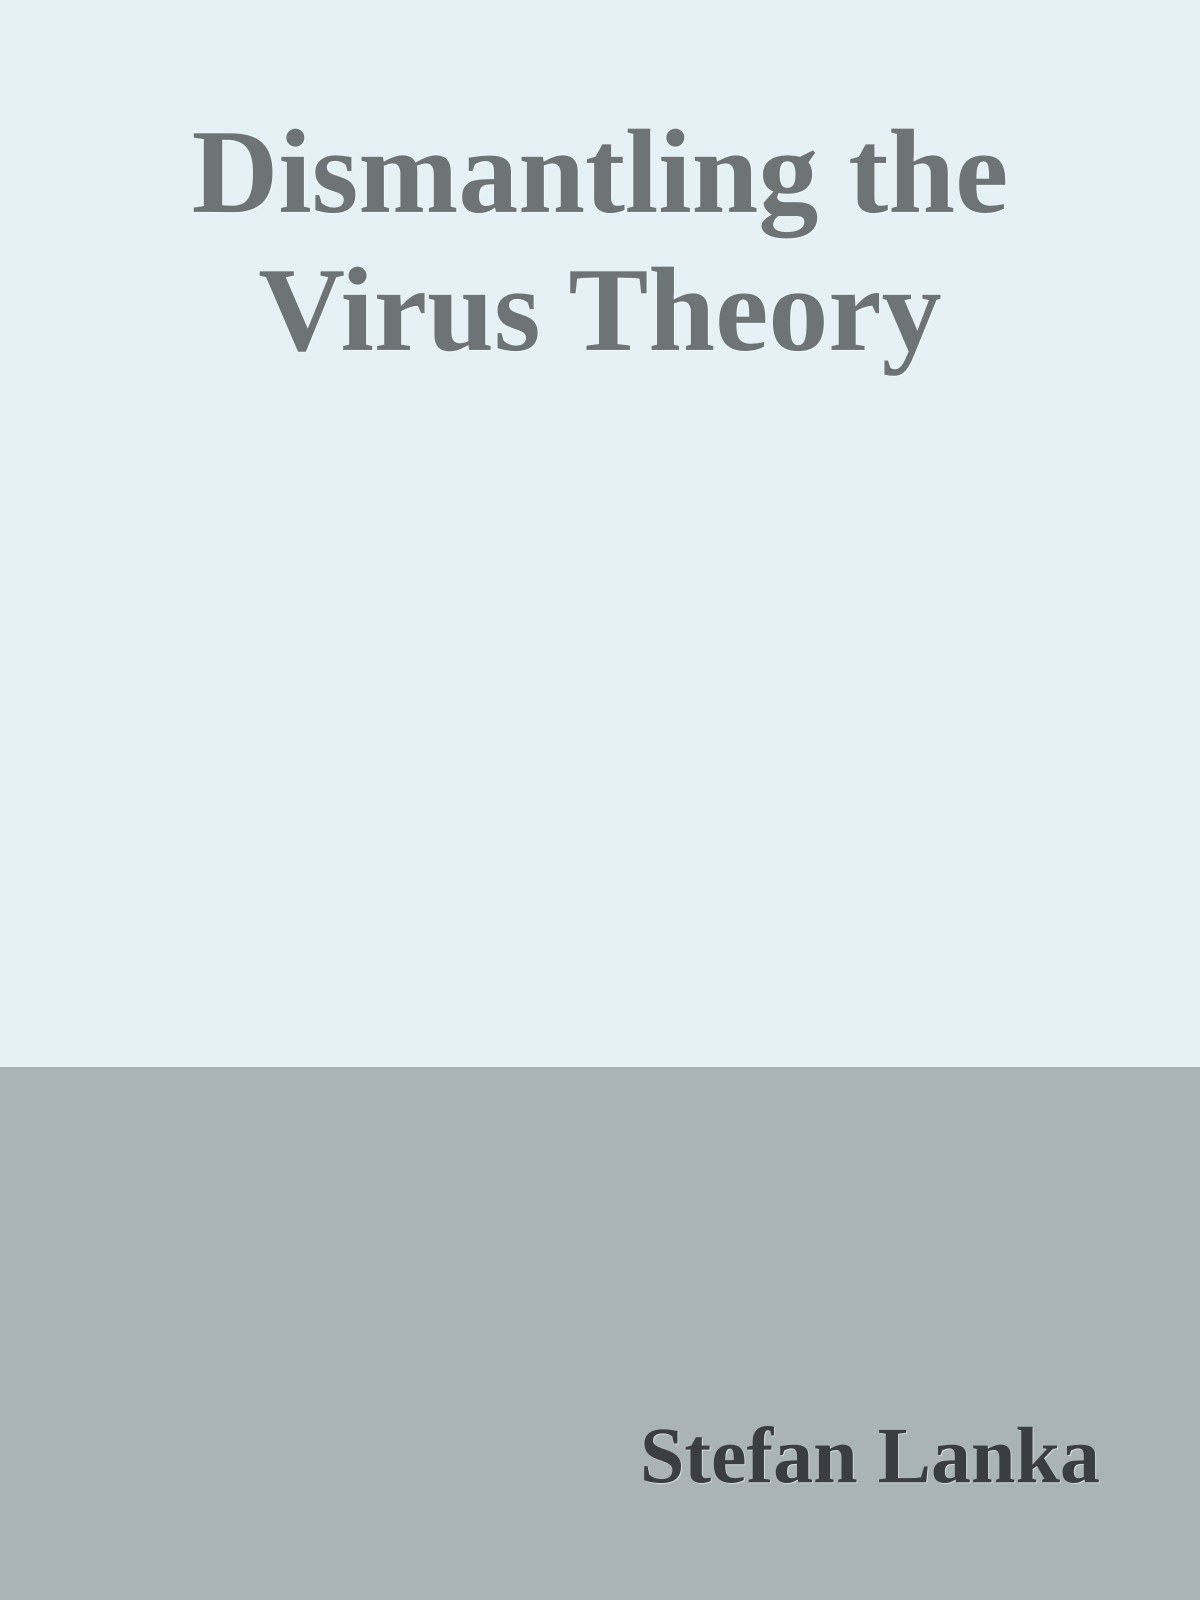 Dismantling the Virus Theory (2015) by Stefan Lanka